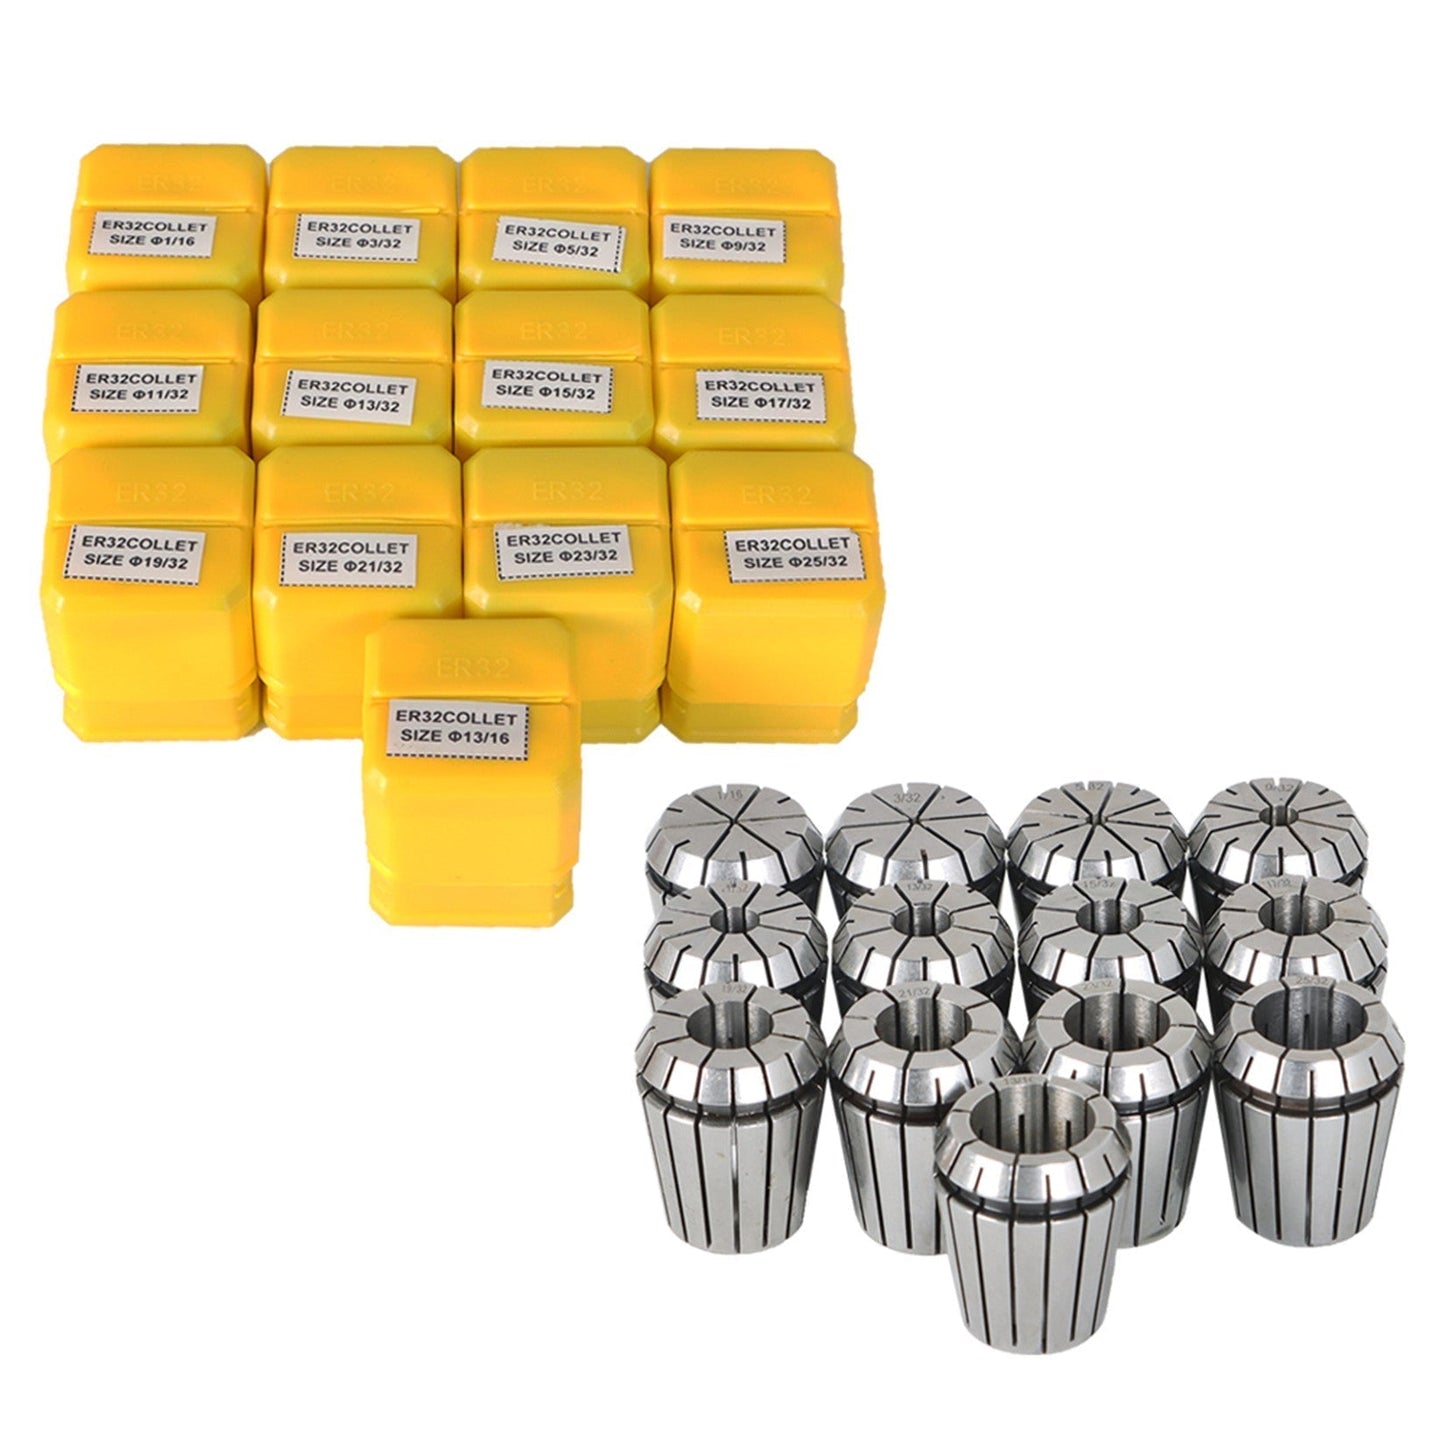 findmall  ER32 Collet Set 13Pcs ER32 Collet Chuck Spring Collet Set CNC Engraving Milling Lathe Chuck Tool 1/16-13/16 Inch Fit for CNC Engraving Machine and Milling Lathe Tool FINDMALLPARTS